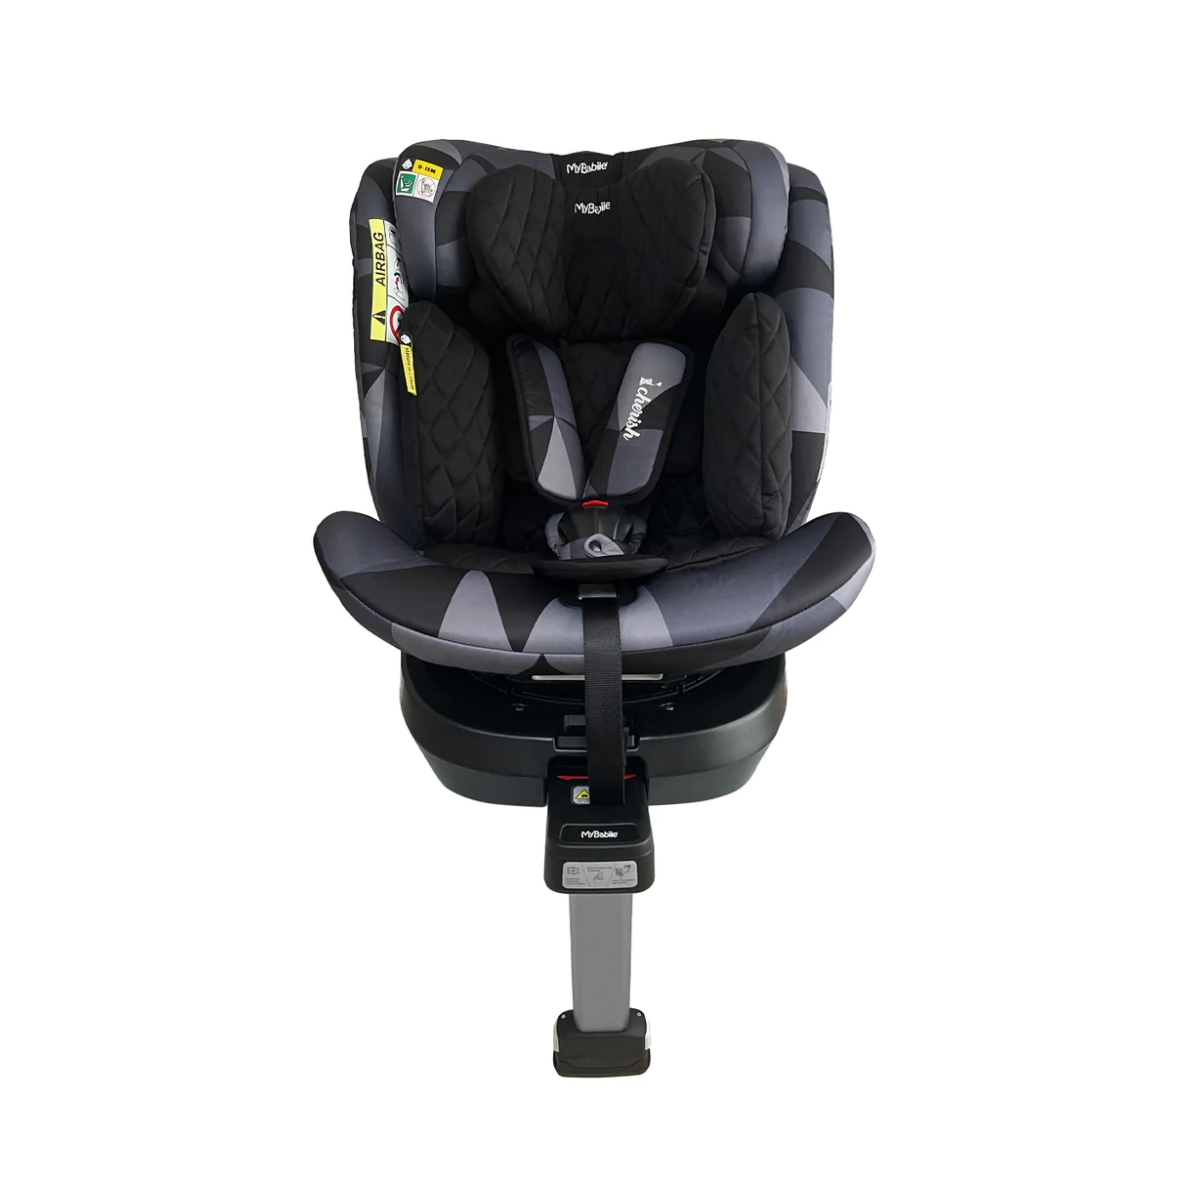 My Babiie Dani Dyer Spin Group 0+/1/2/3 iSize Isofix Car Seat